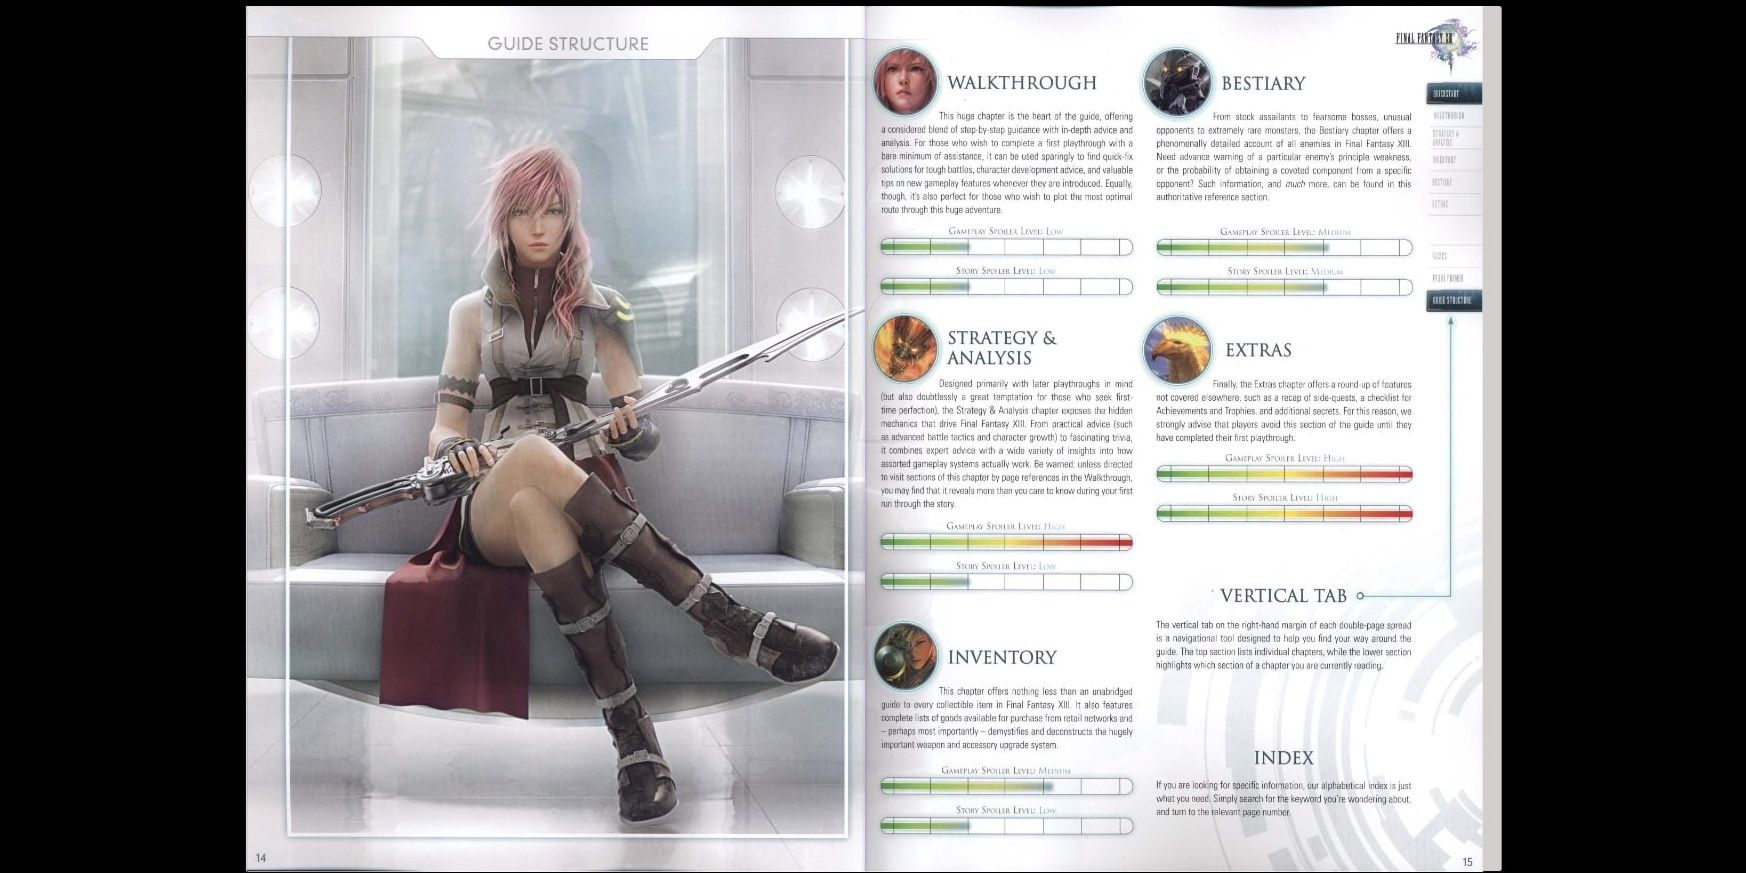 Lightning poses in the Final Fantasy 13 strategy guide